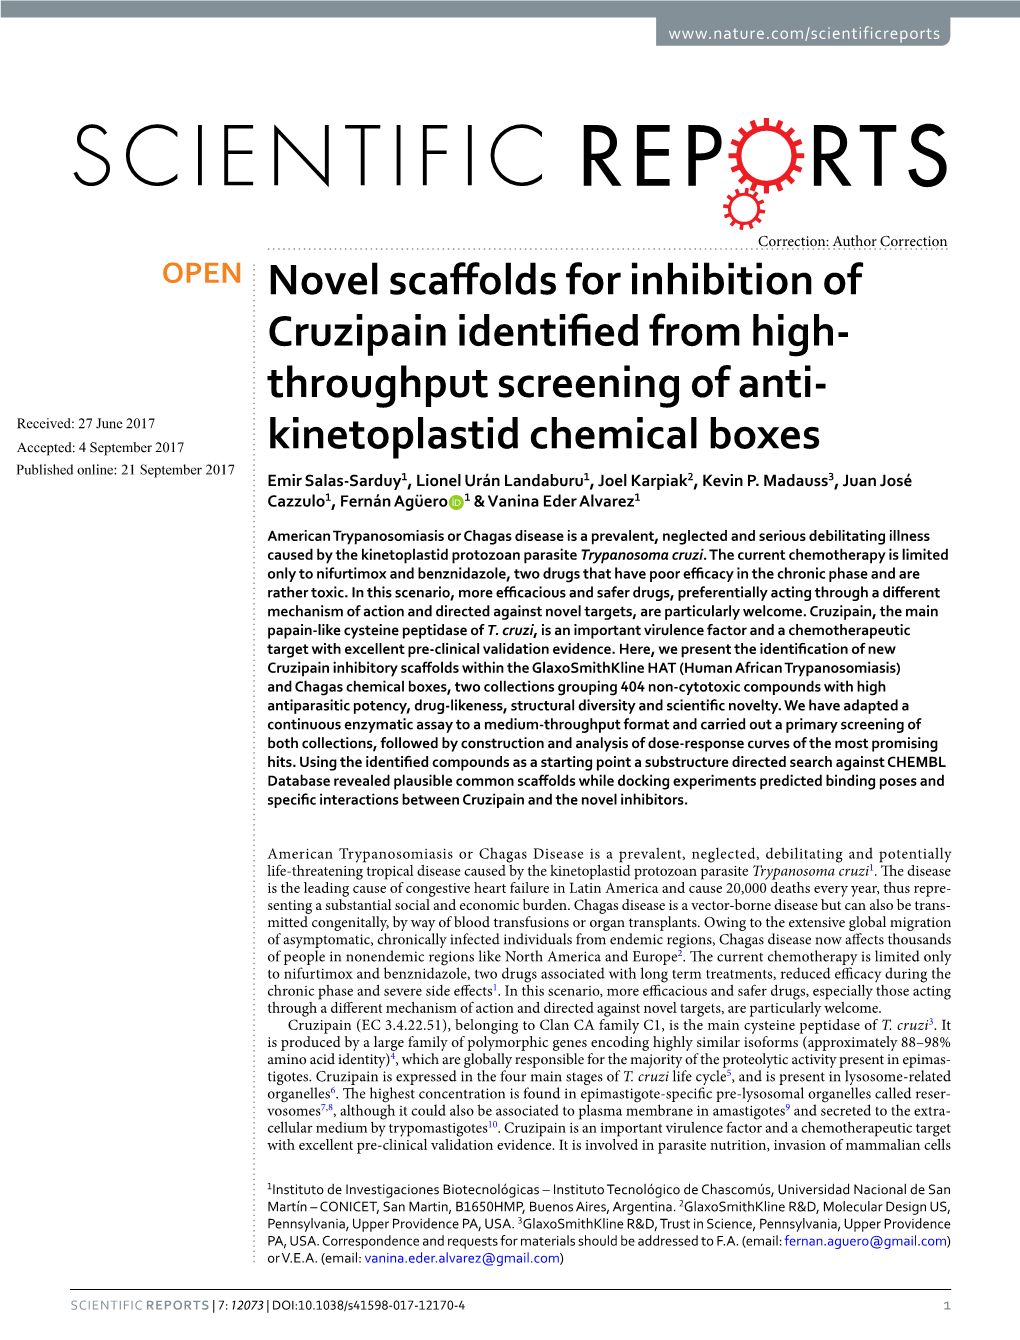 Novel Scaffolds for Inhibition of Cruzipain Identified from High